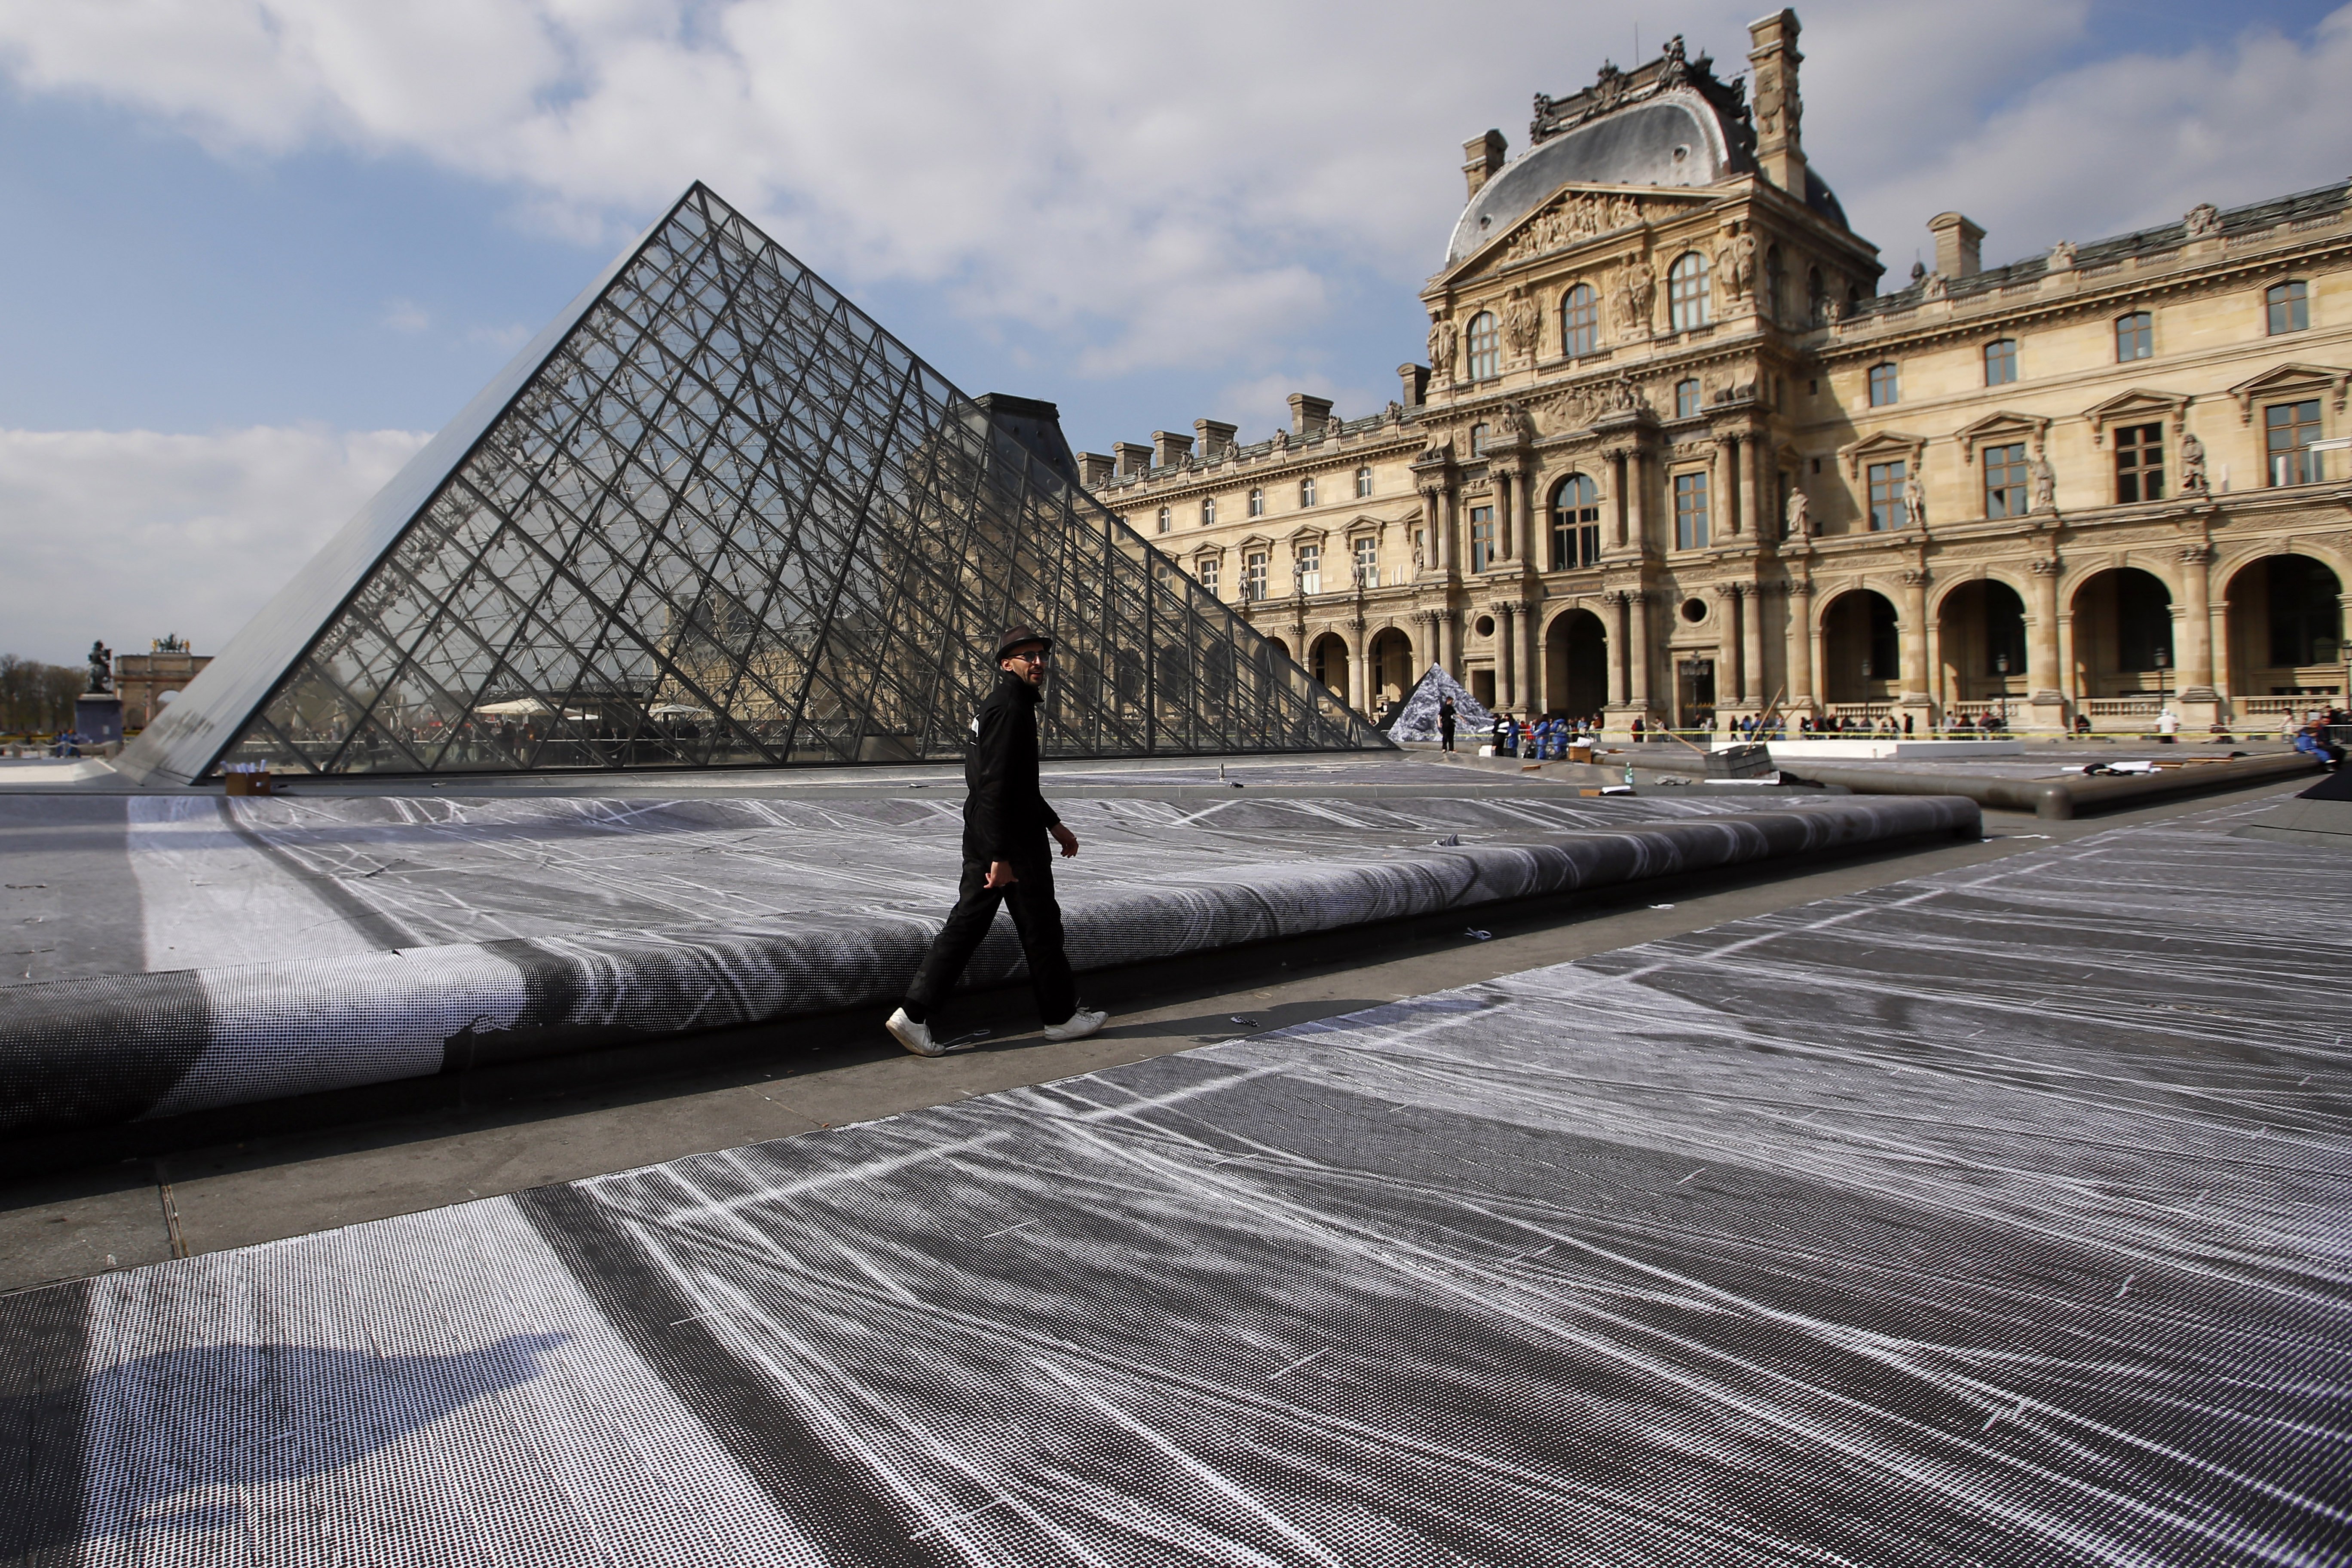 French street artist JR walks in the courtyard of the Louvre Museum near the glass pyramid designed by architect Leoh Ming Pei, in Paris, Wednesday, March 27, 2019 as the Louvre Museum celebrates the 30th anniversary of its glass pyramid. JR project is a giant collage of the pyramid to bring it out of the ground by revealing the foundations of the Napoleon courtyard where it is erected. (AP Photo/Francois Mori)